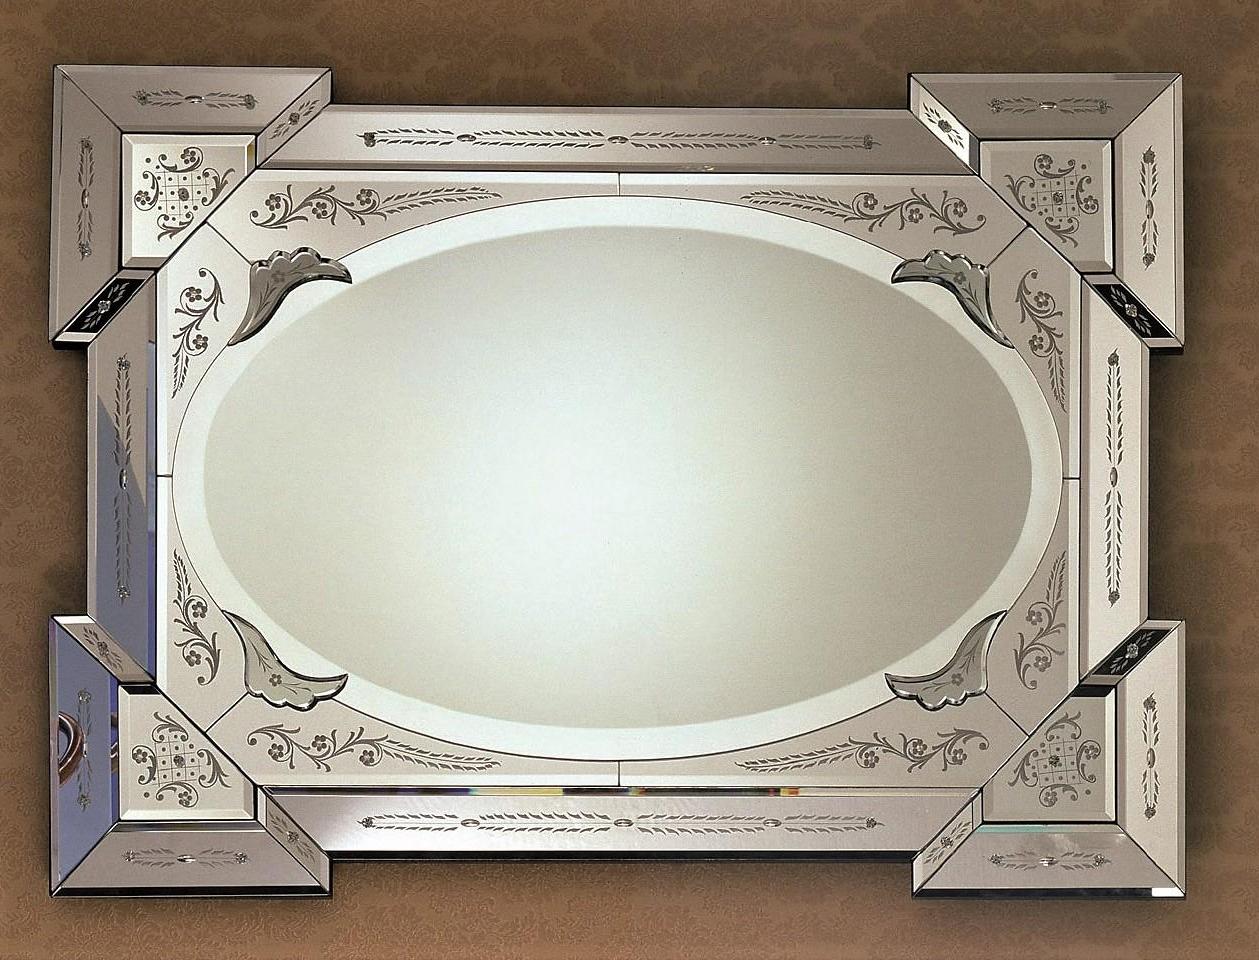 Luxurious mirror in Murano glass, in French 19th century style, produced by Fratelli Tosi on the island of Murano.
Mirror worked entirely, bevelled, engraved, carved and polished entirely by hand, the silvering in pure silver is still performed